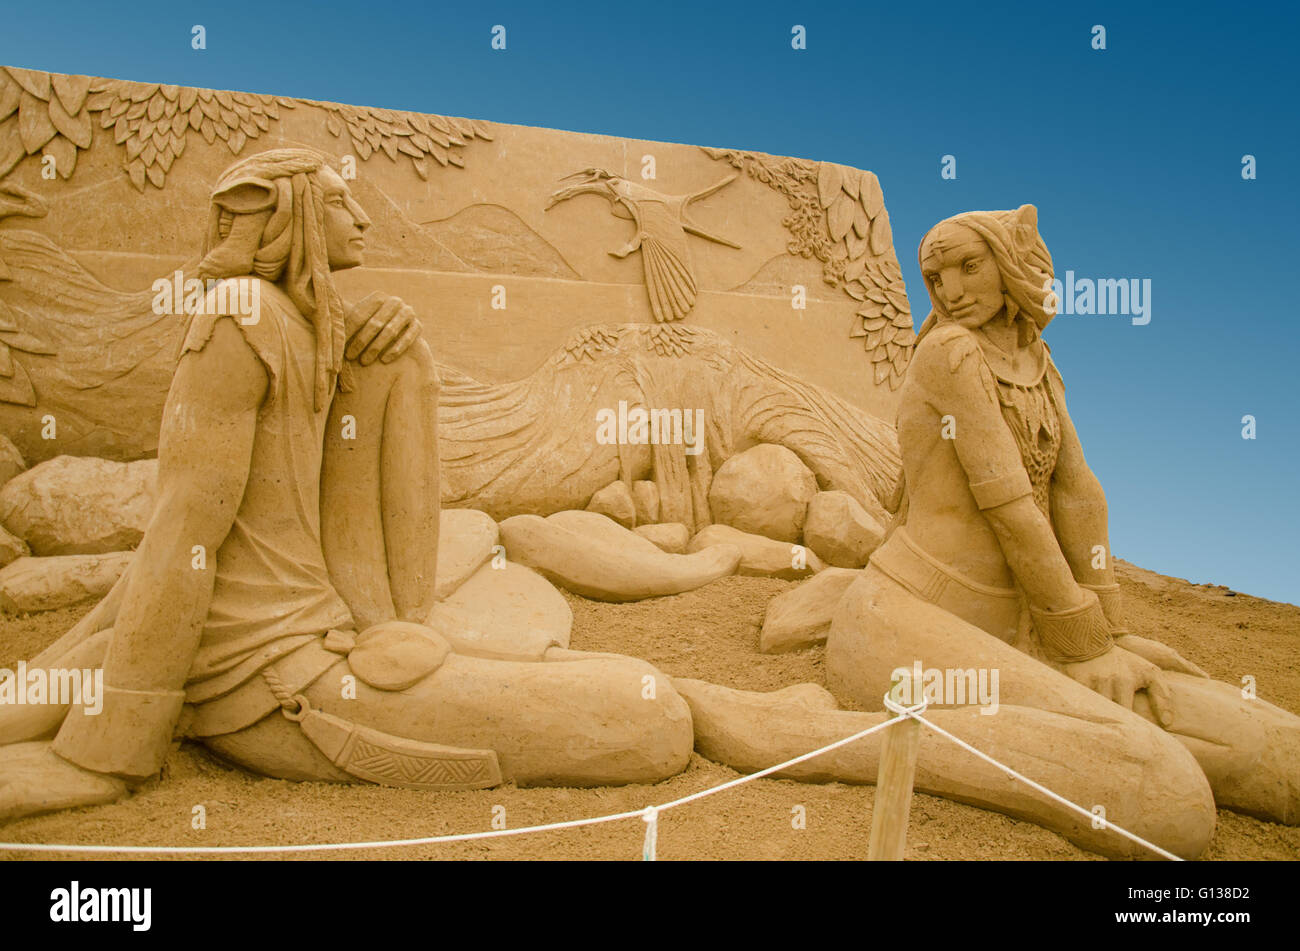 Sand sculpture of the movie 